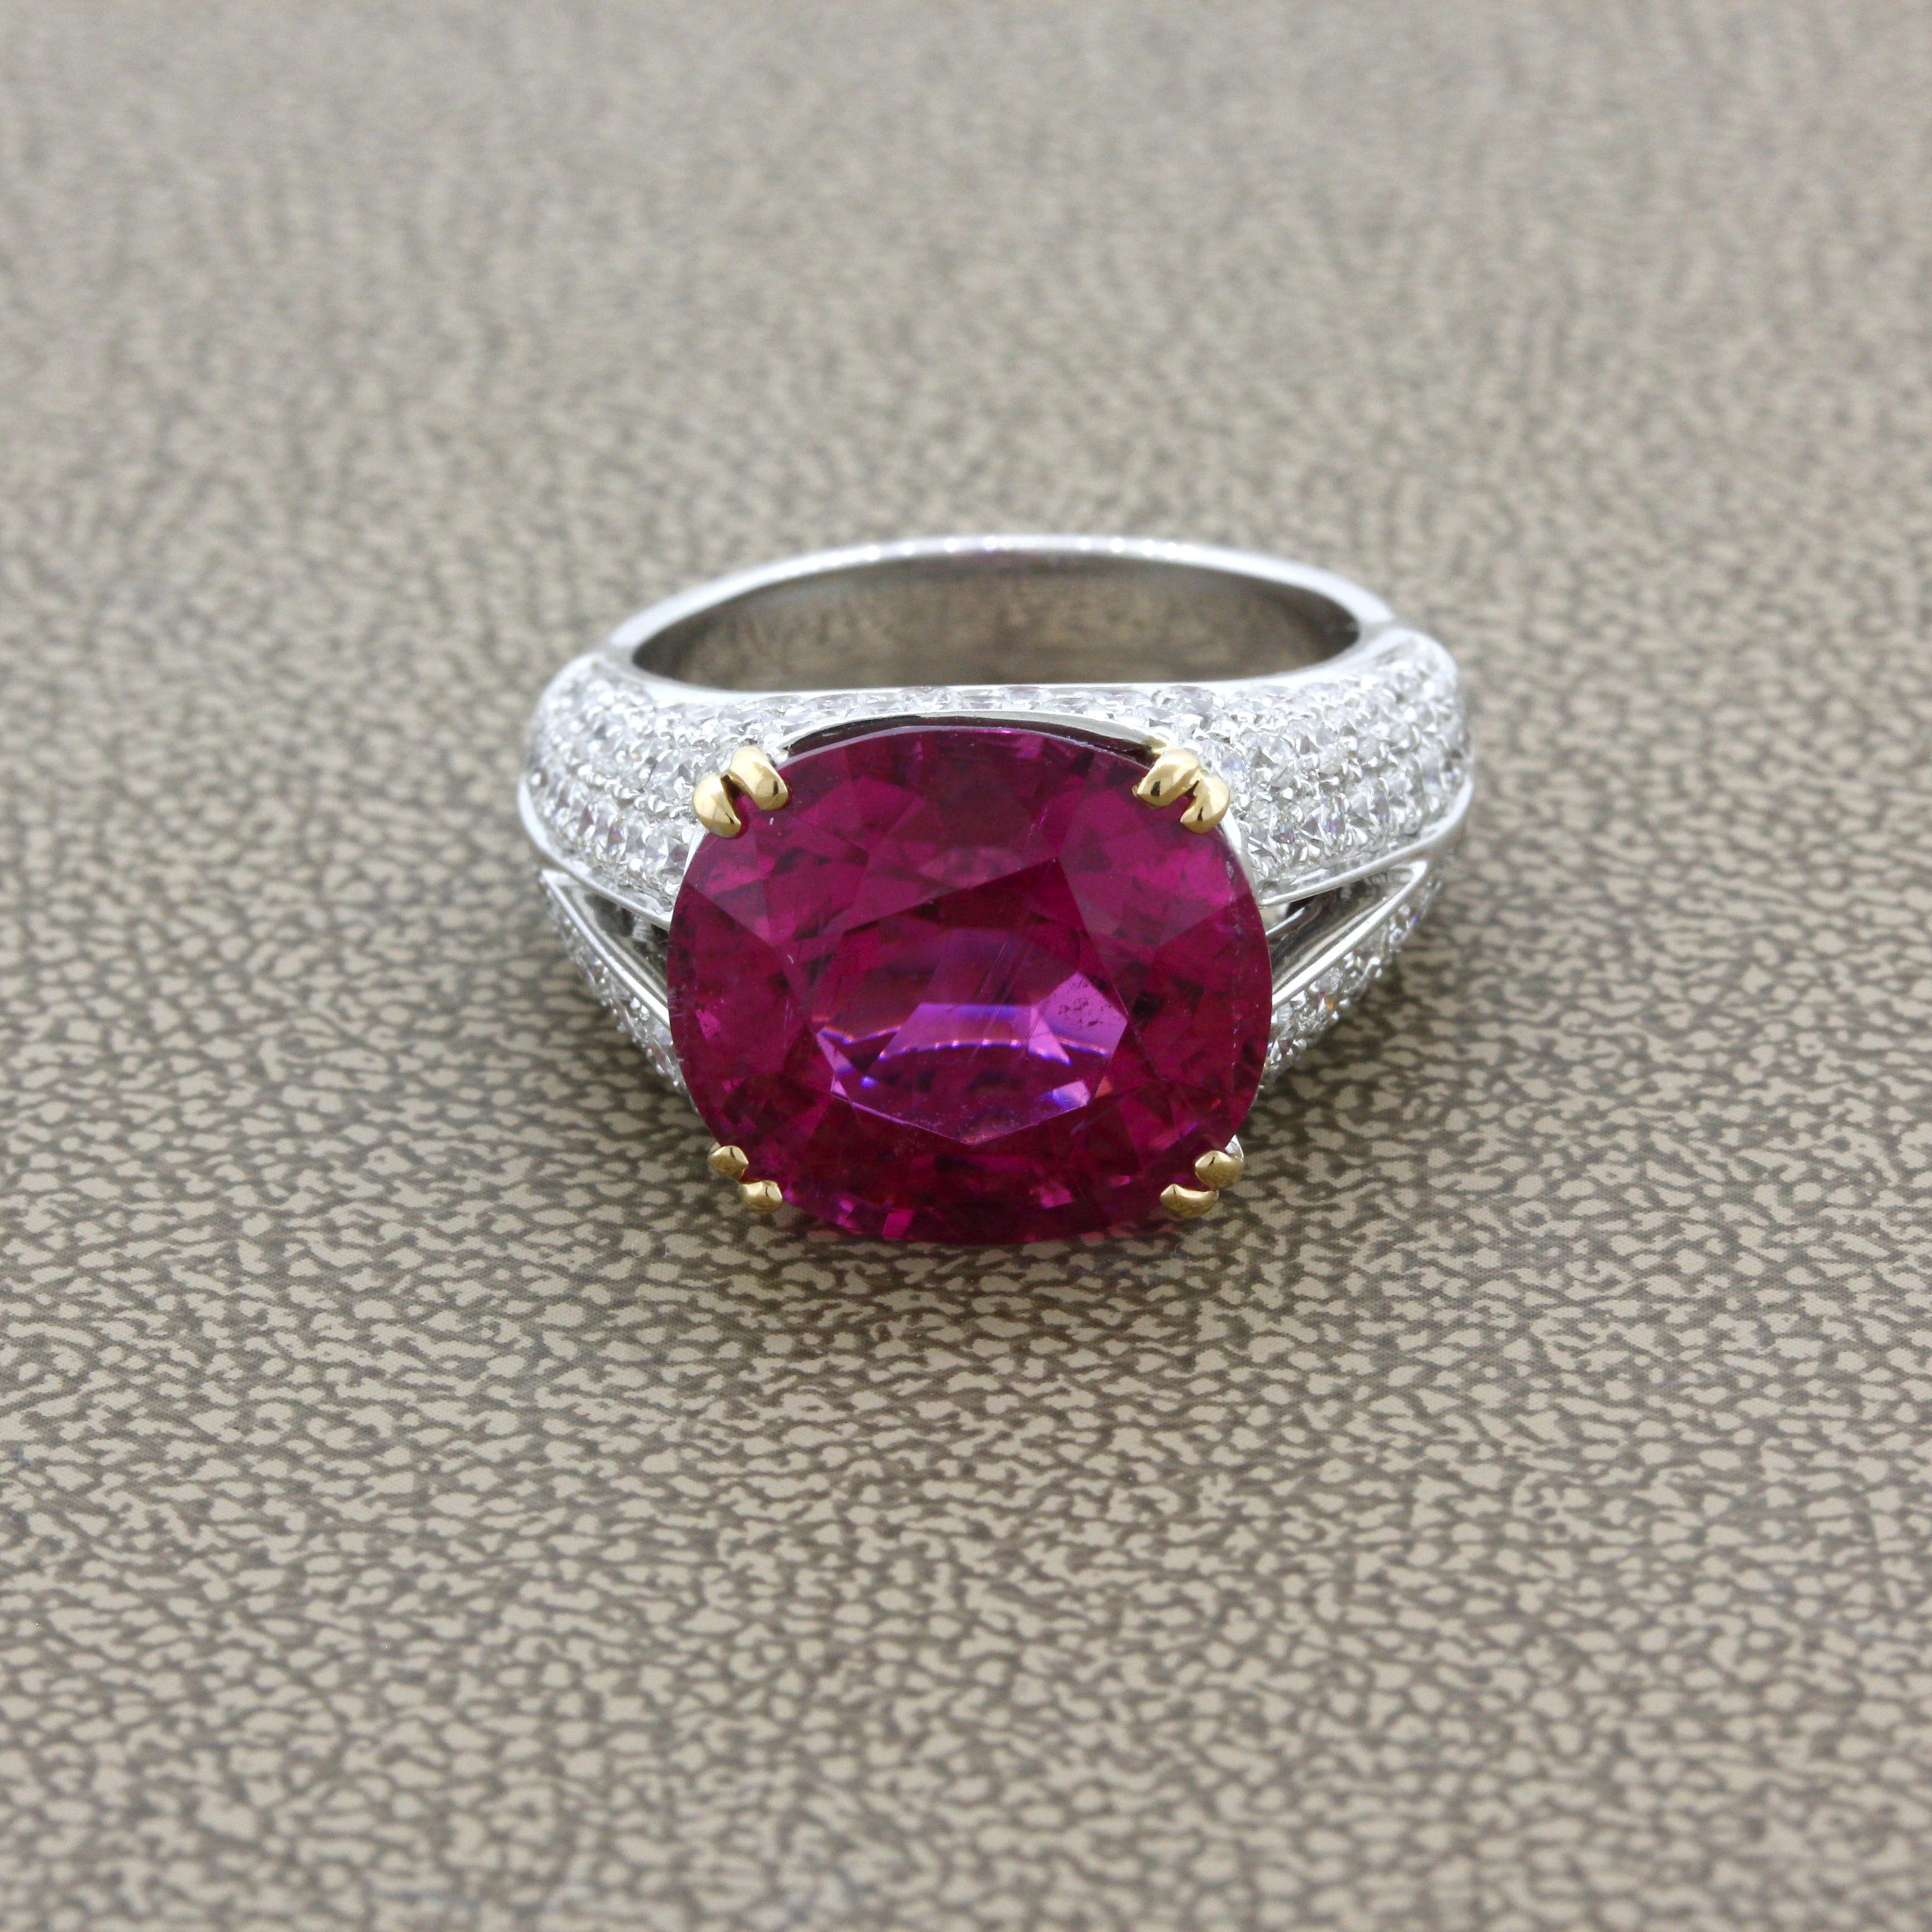 Simply stunning! The ring features an amazing 9.42 carat rubellite tourmaline with the most bright vivid and vibrant color we have seen in a long time! It is a rich pinkish-red color that will make you smile and feel warm inside. It is complemented